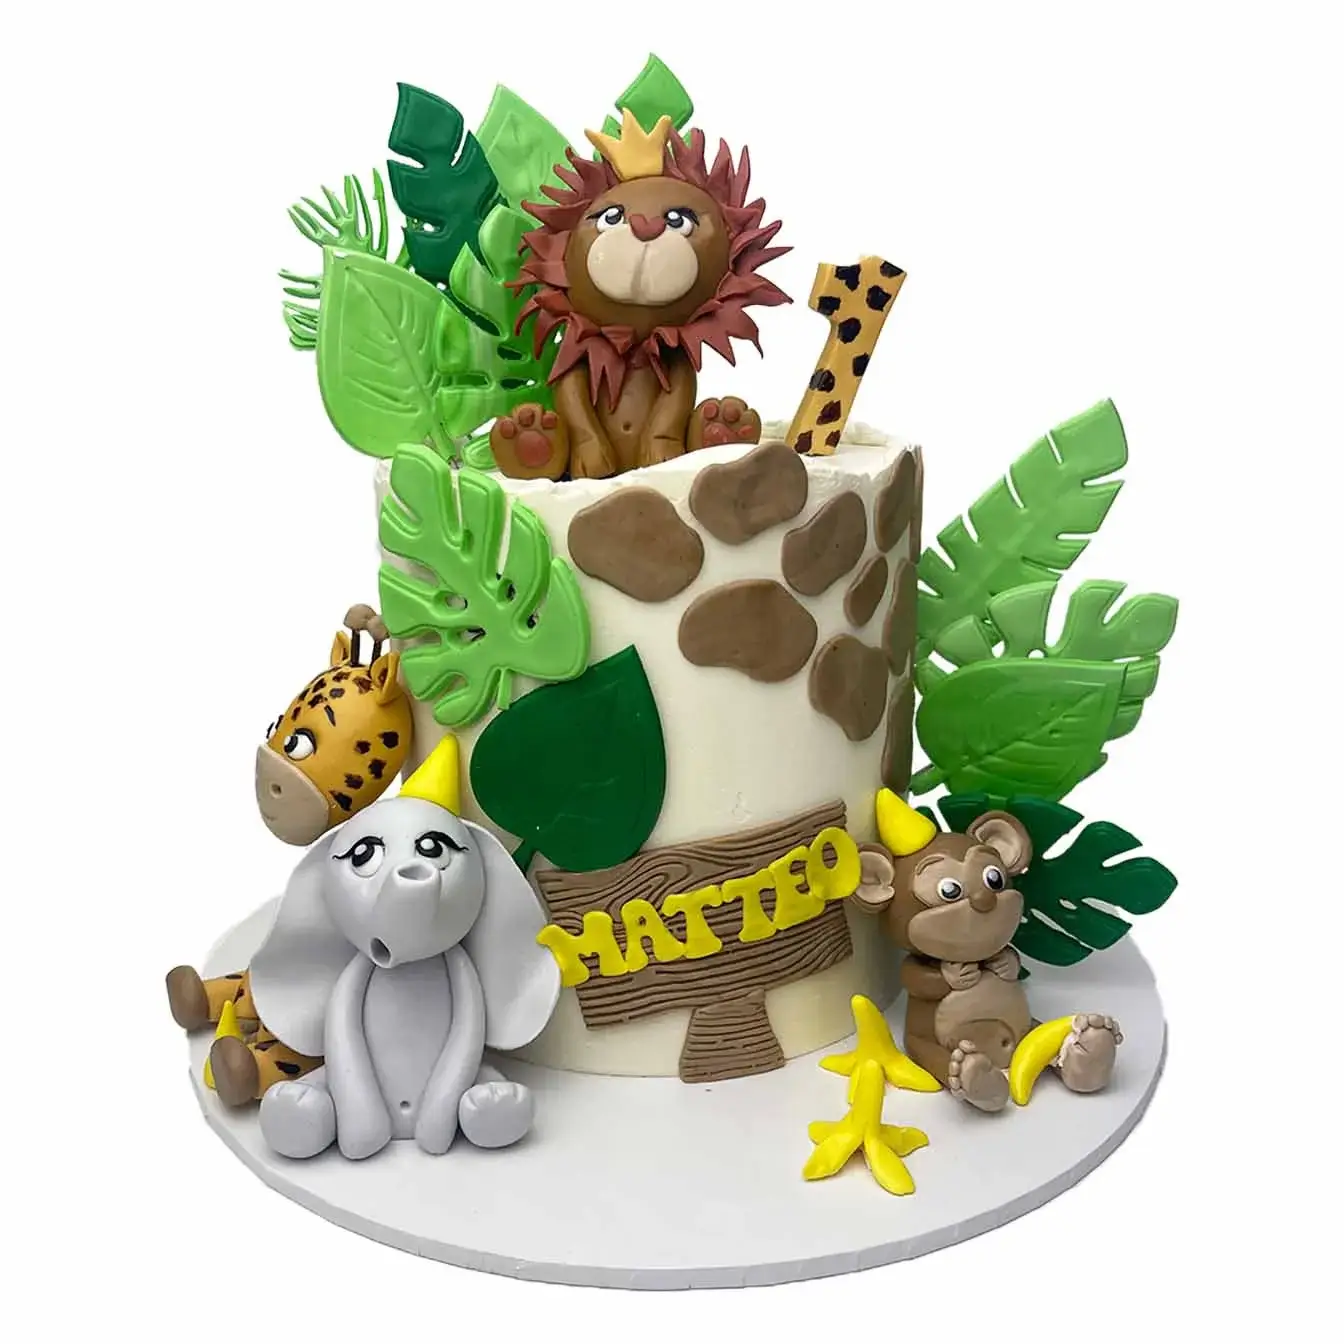 Wild Jungle Adventure Cake - A cake adorned with fondant leaves and edible figures of a monkey, lion, elephant, and giraffe, a whimsical centerpiece for jungle-themed parties and celebrations.